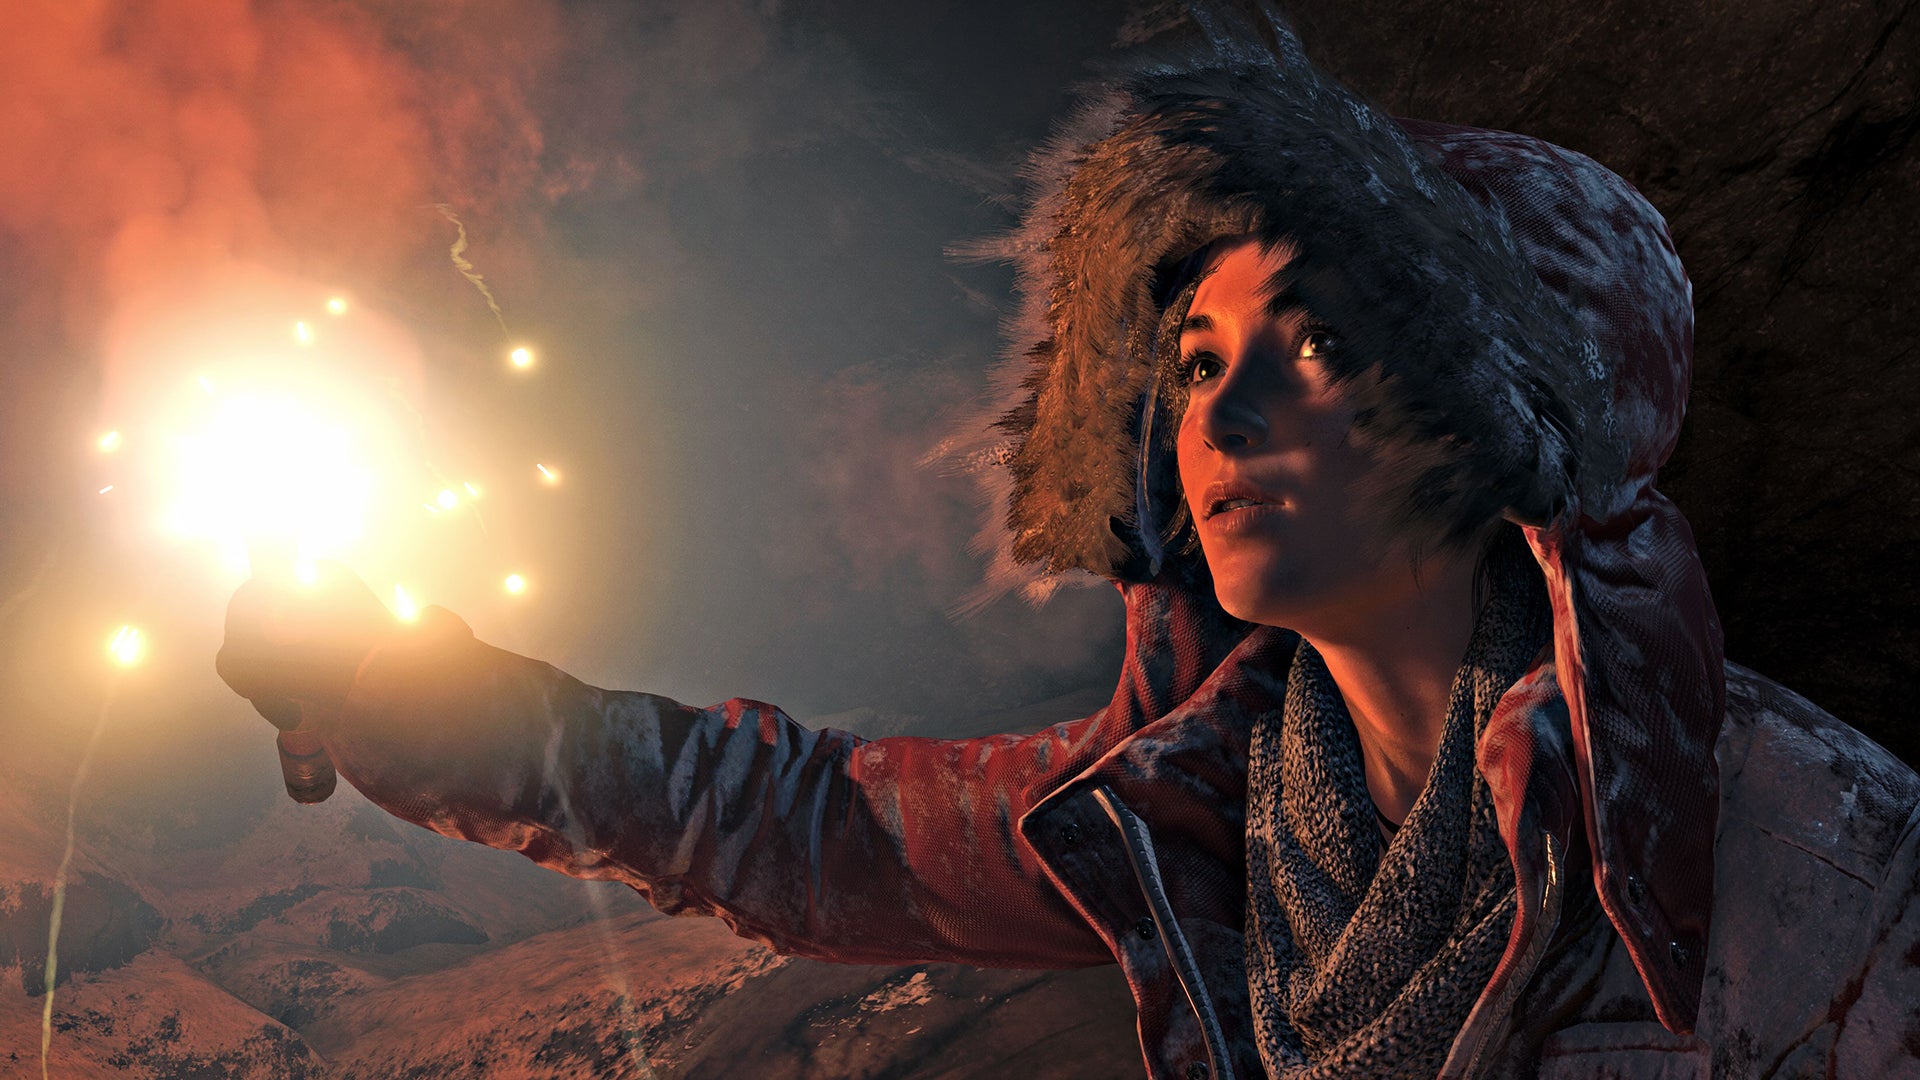 Image for Jelly Deals: Rise of the Tomb Raider for £10 / $12 with the new Humble Monthly